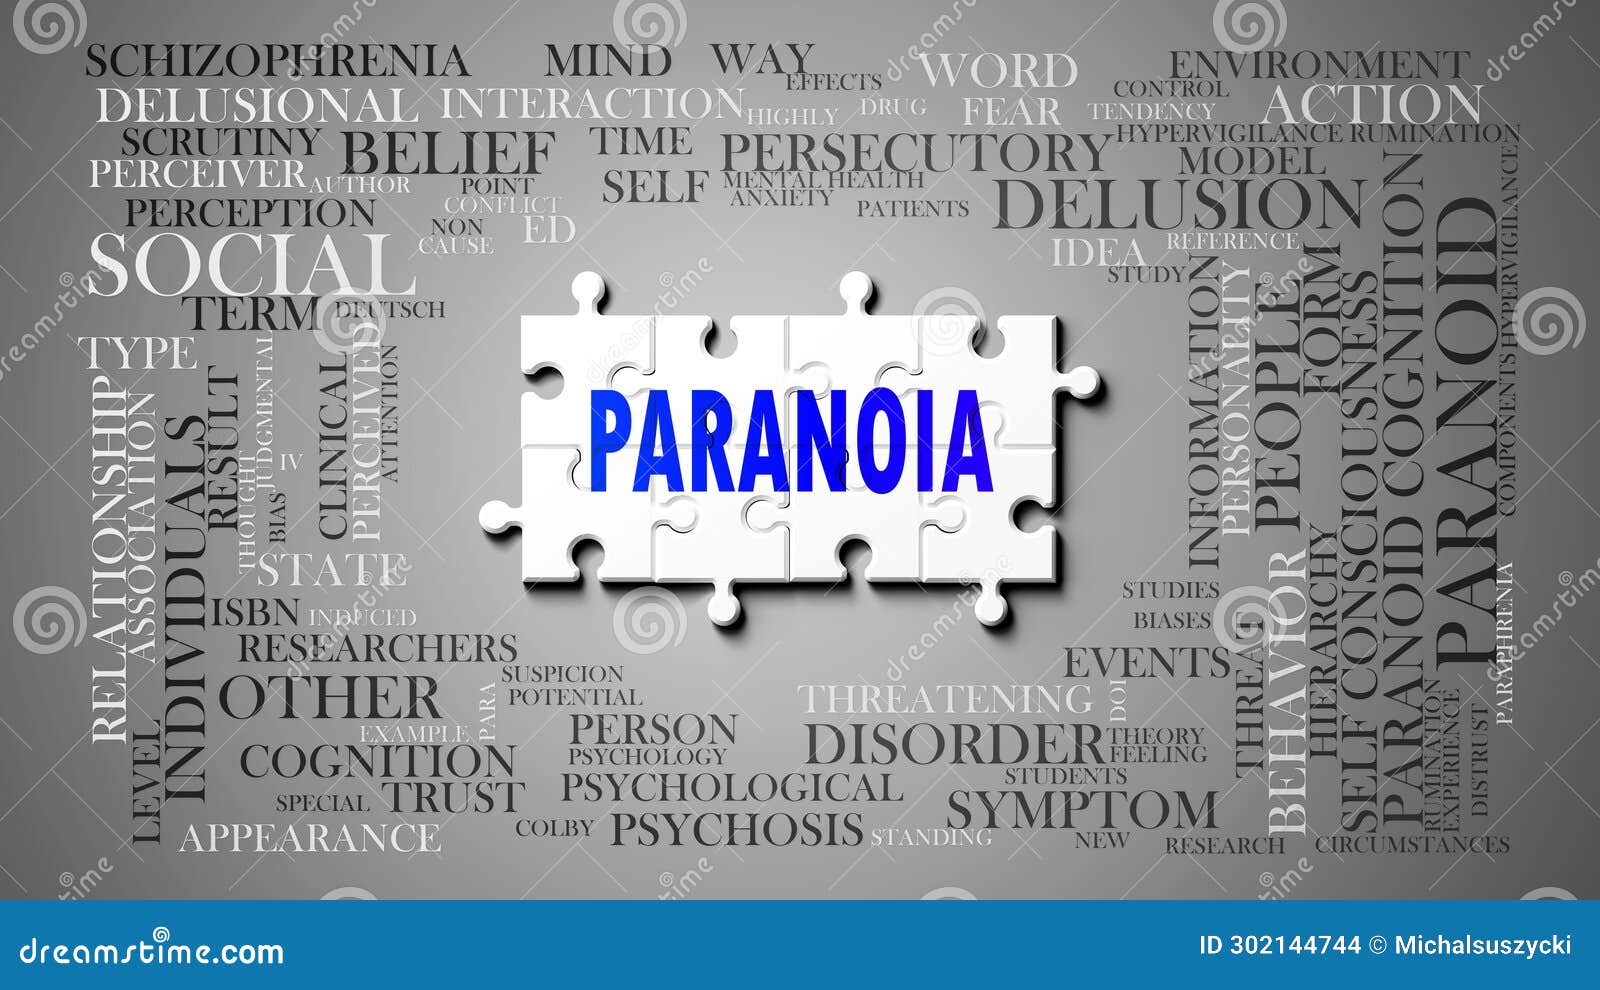 paranoia - a complex subject, related to many . pictured as a puzzle and a word cloud made of most important ideas and